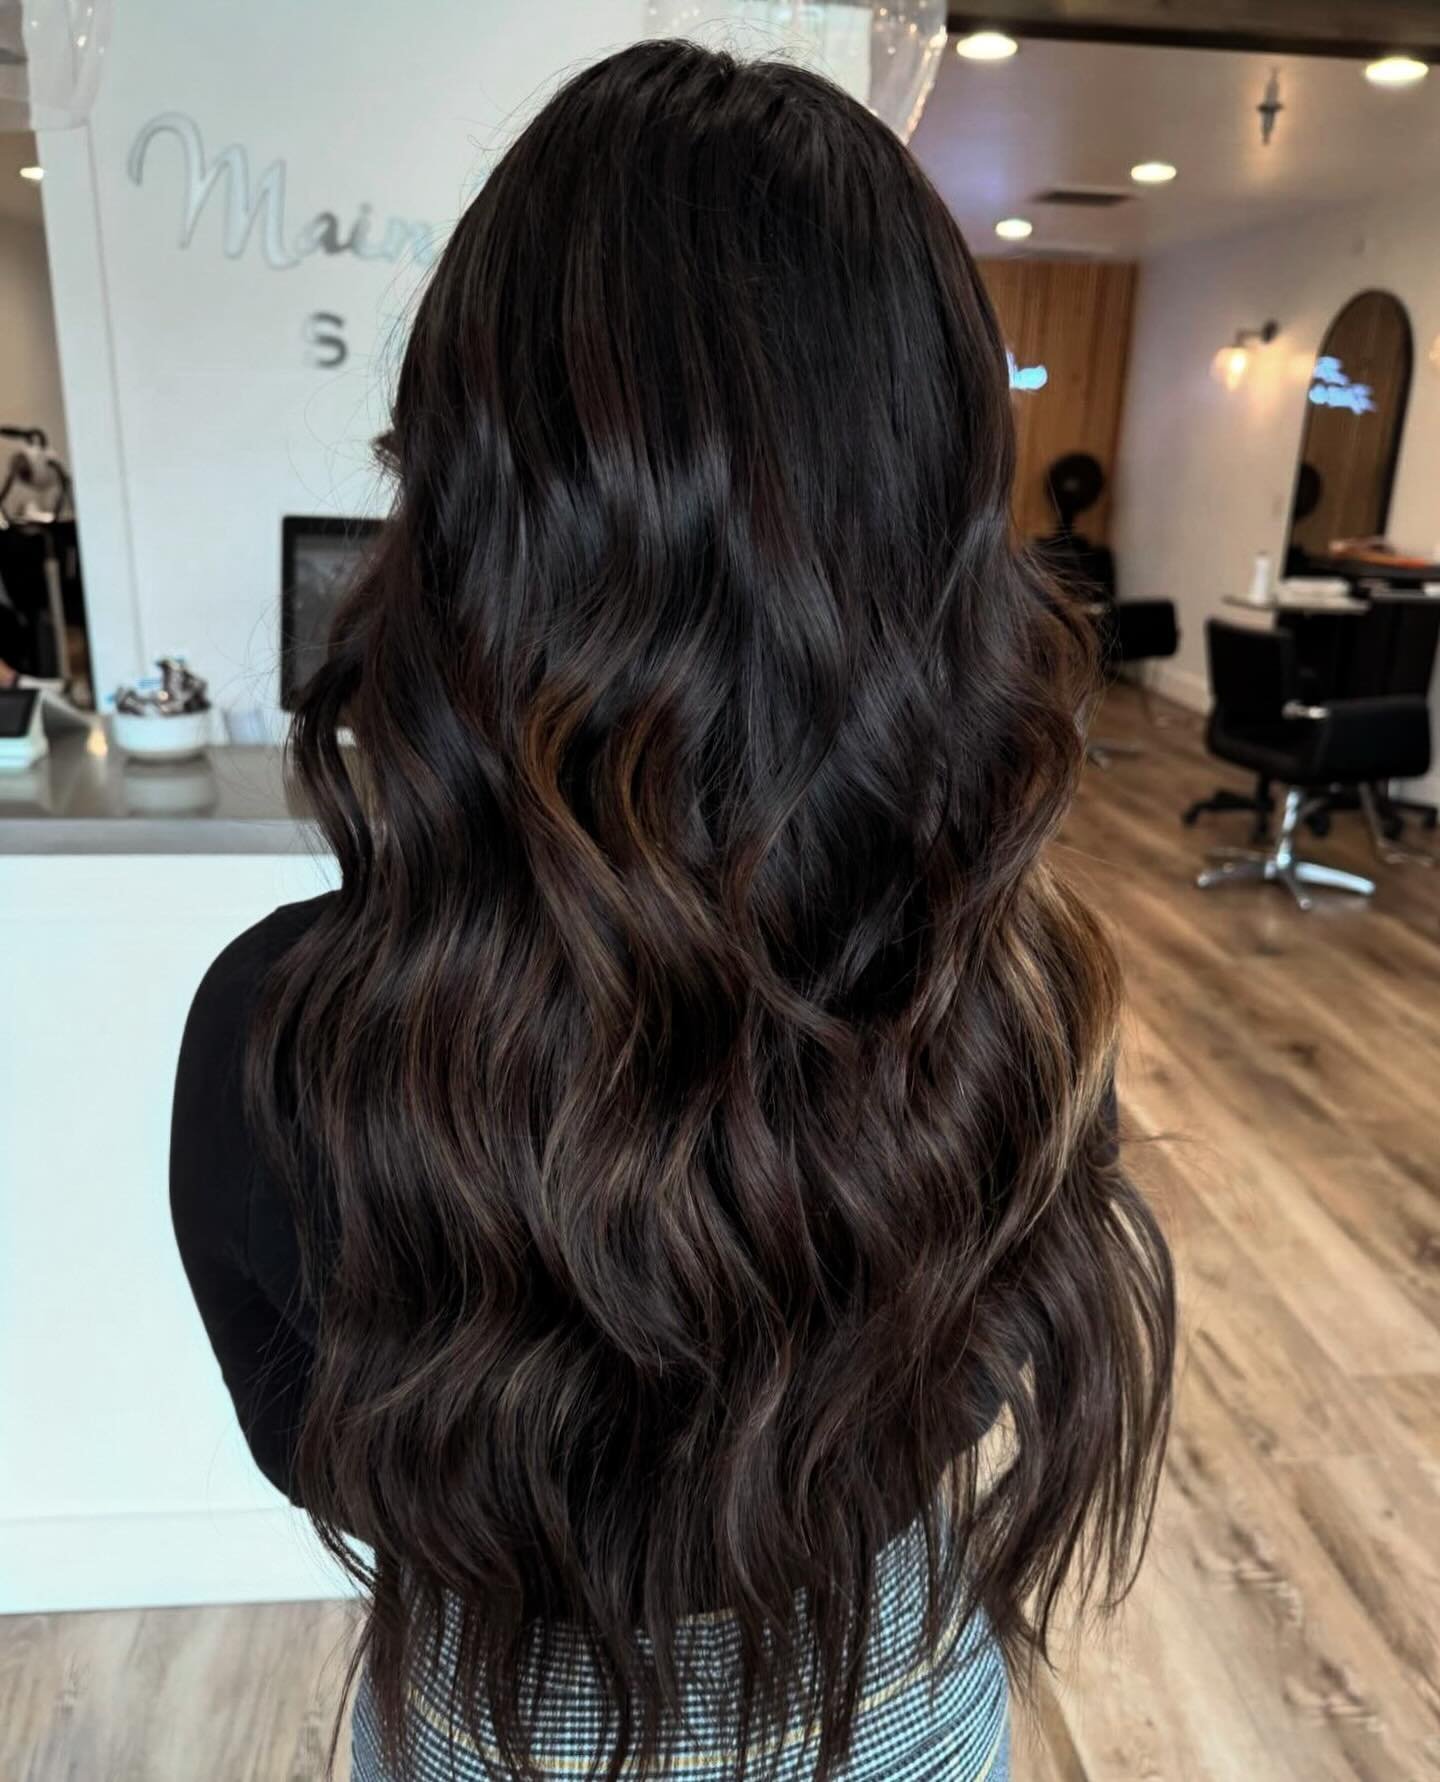 Beautiful length and fullness courtesy of hand tied extensions @ Main Street✨ 

📸 @abbiejuth_hair 

#sumnerspremiersalon #sumnerhair #sumnerhandtiedextensions #handtiedextensions #sumnerstylist